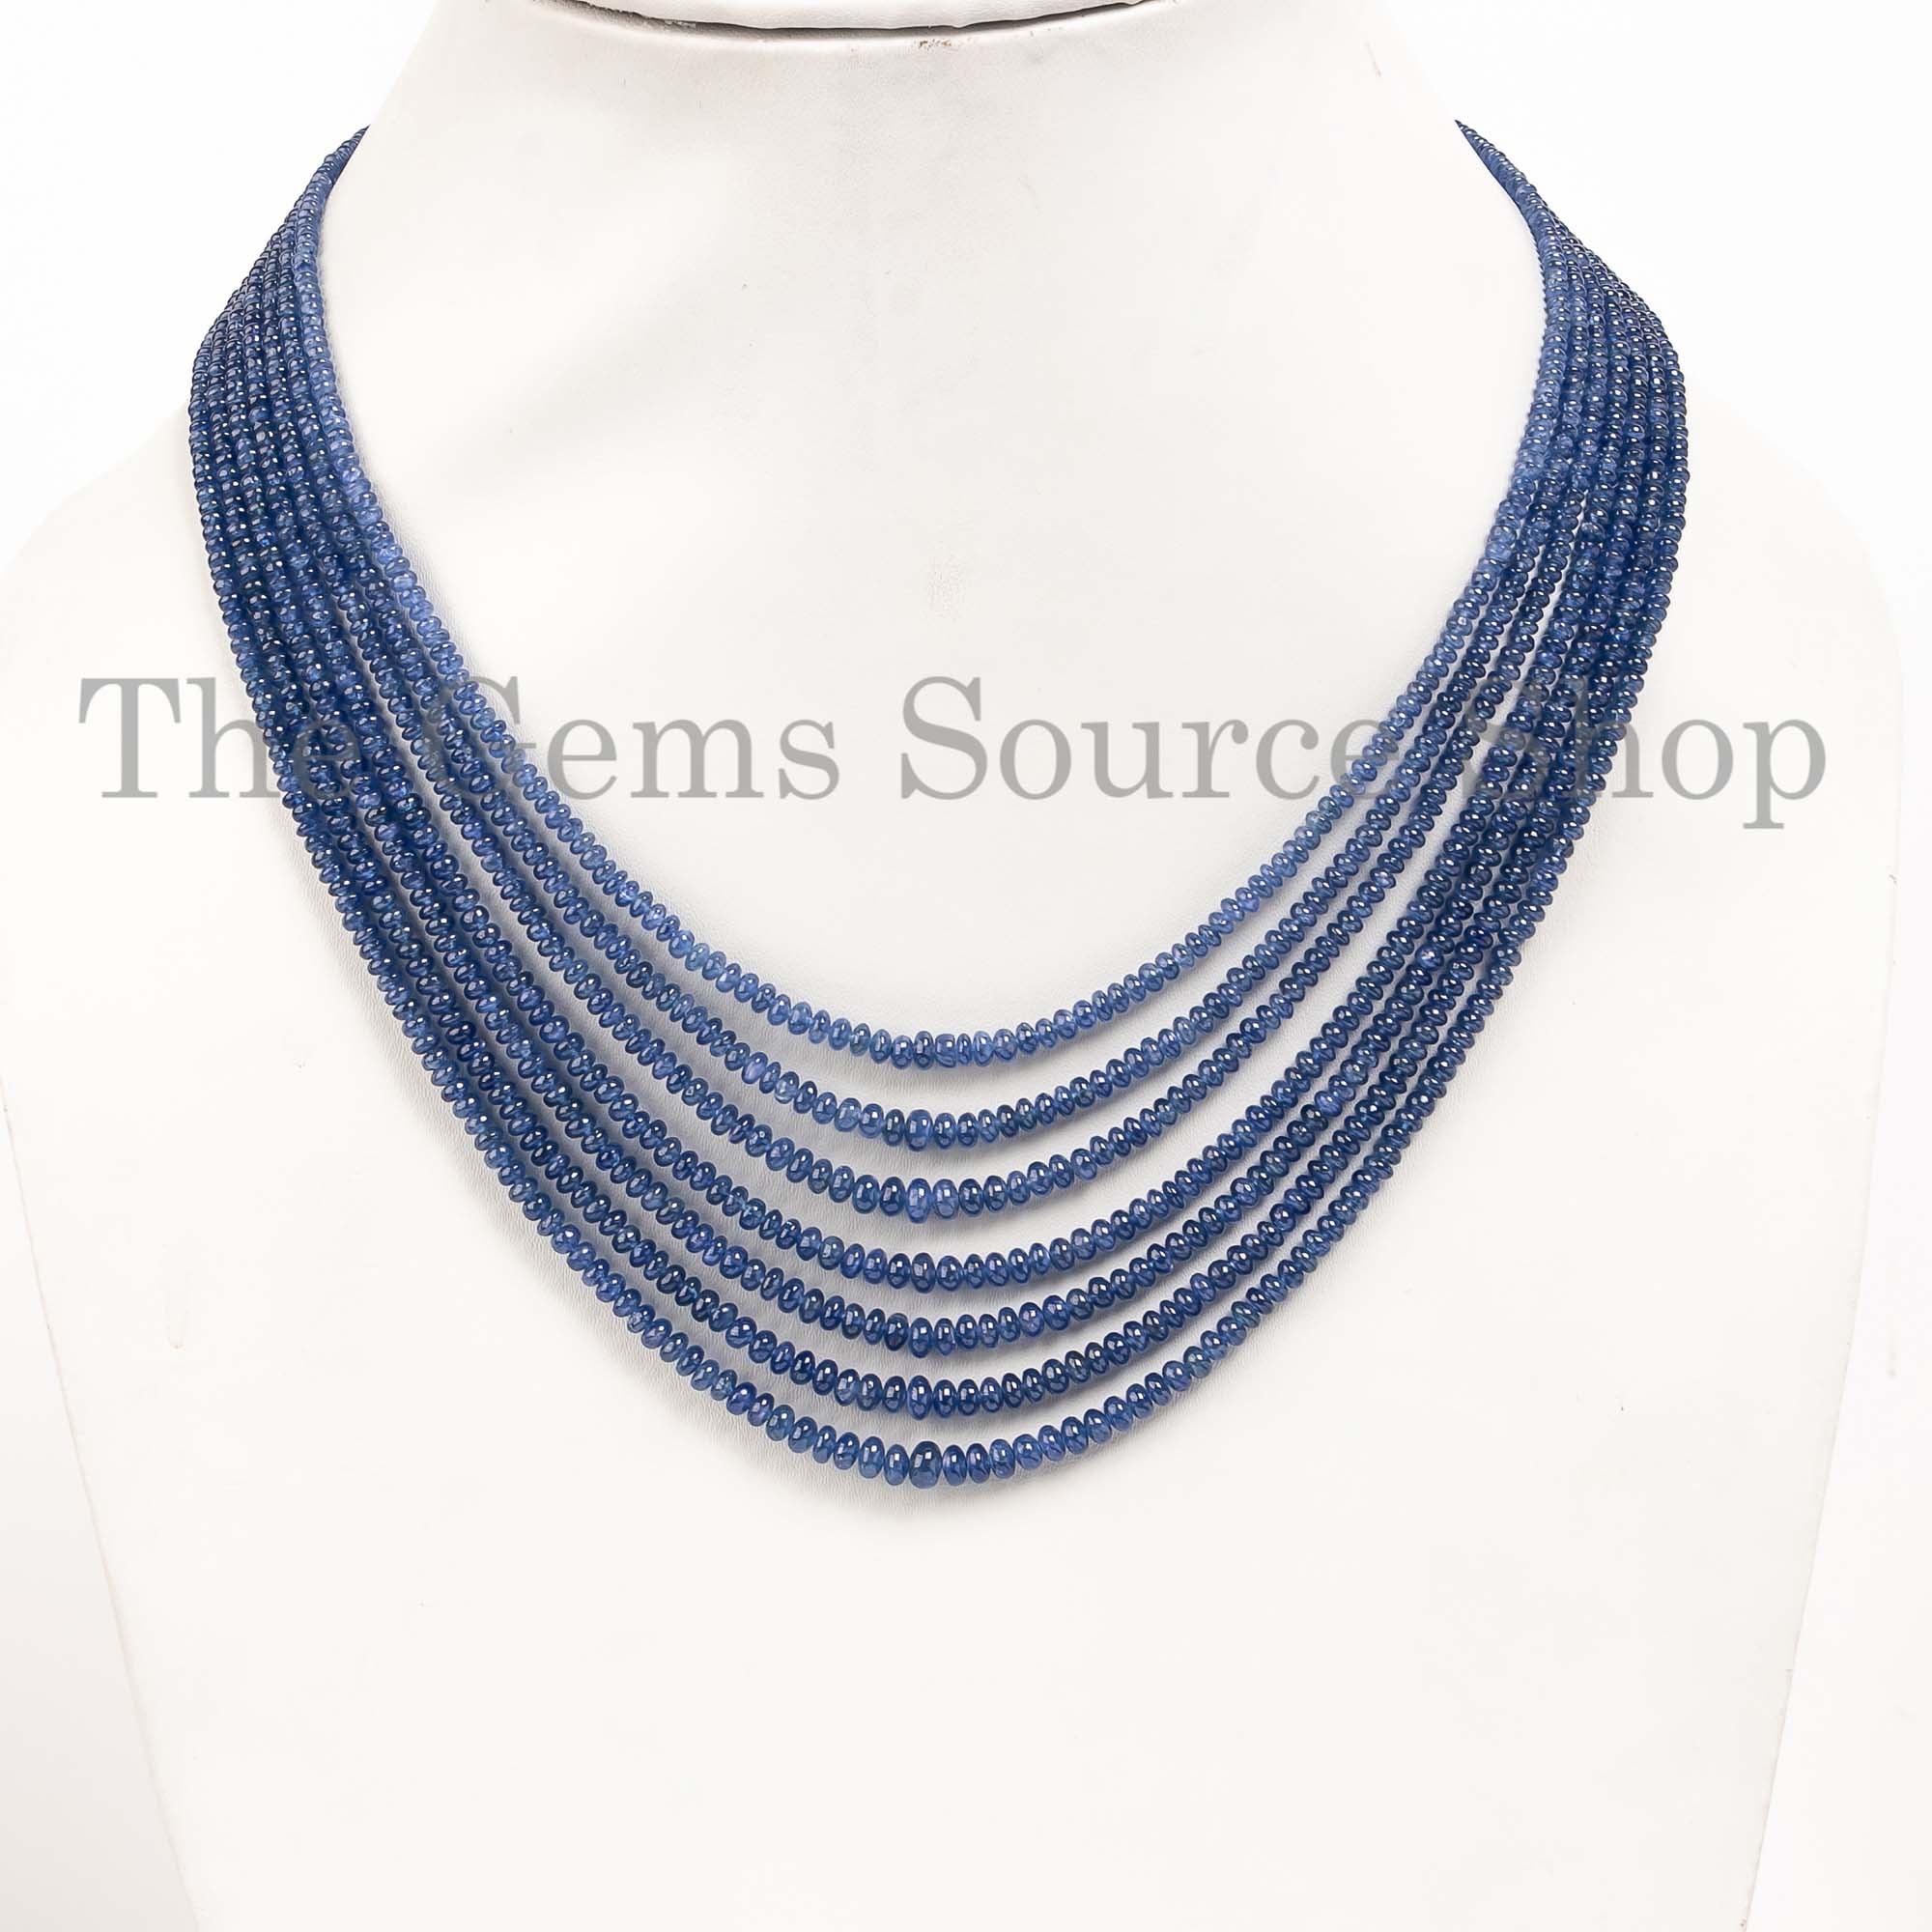 Blue Sapphire Burmese Beads Necklace, Blue Sapphire Smooth Rondelle Beads Necklace, Gemstone Jewelry